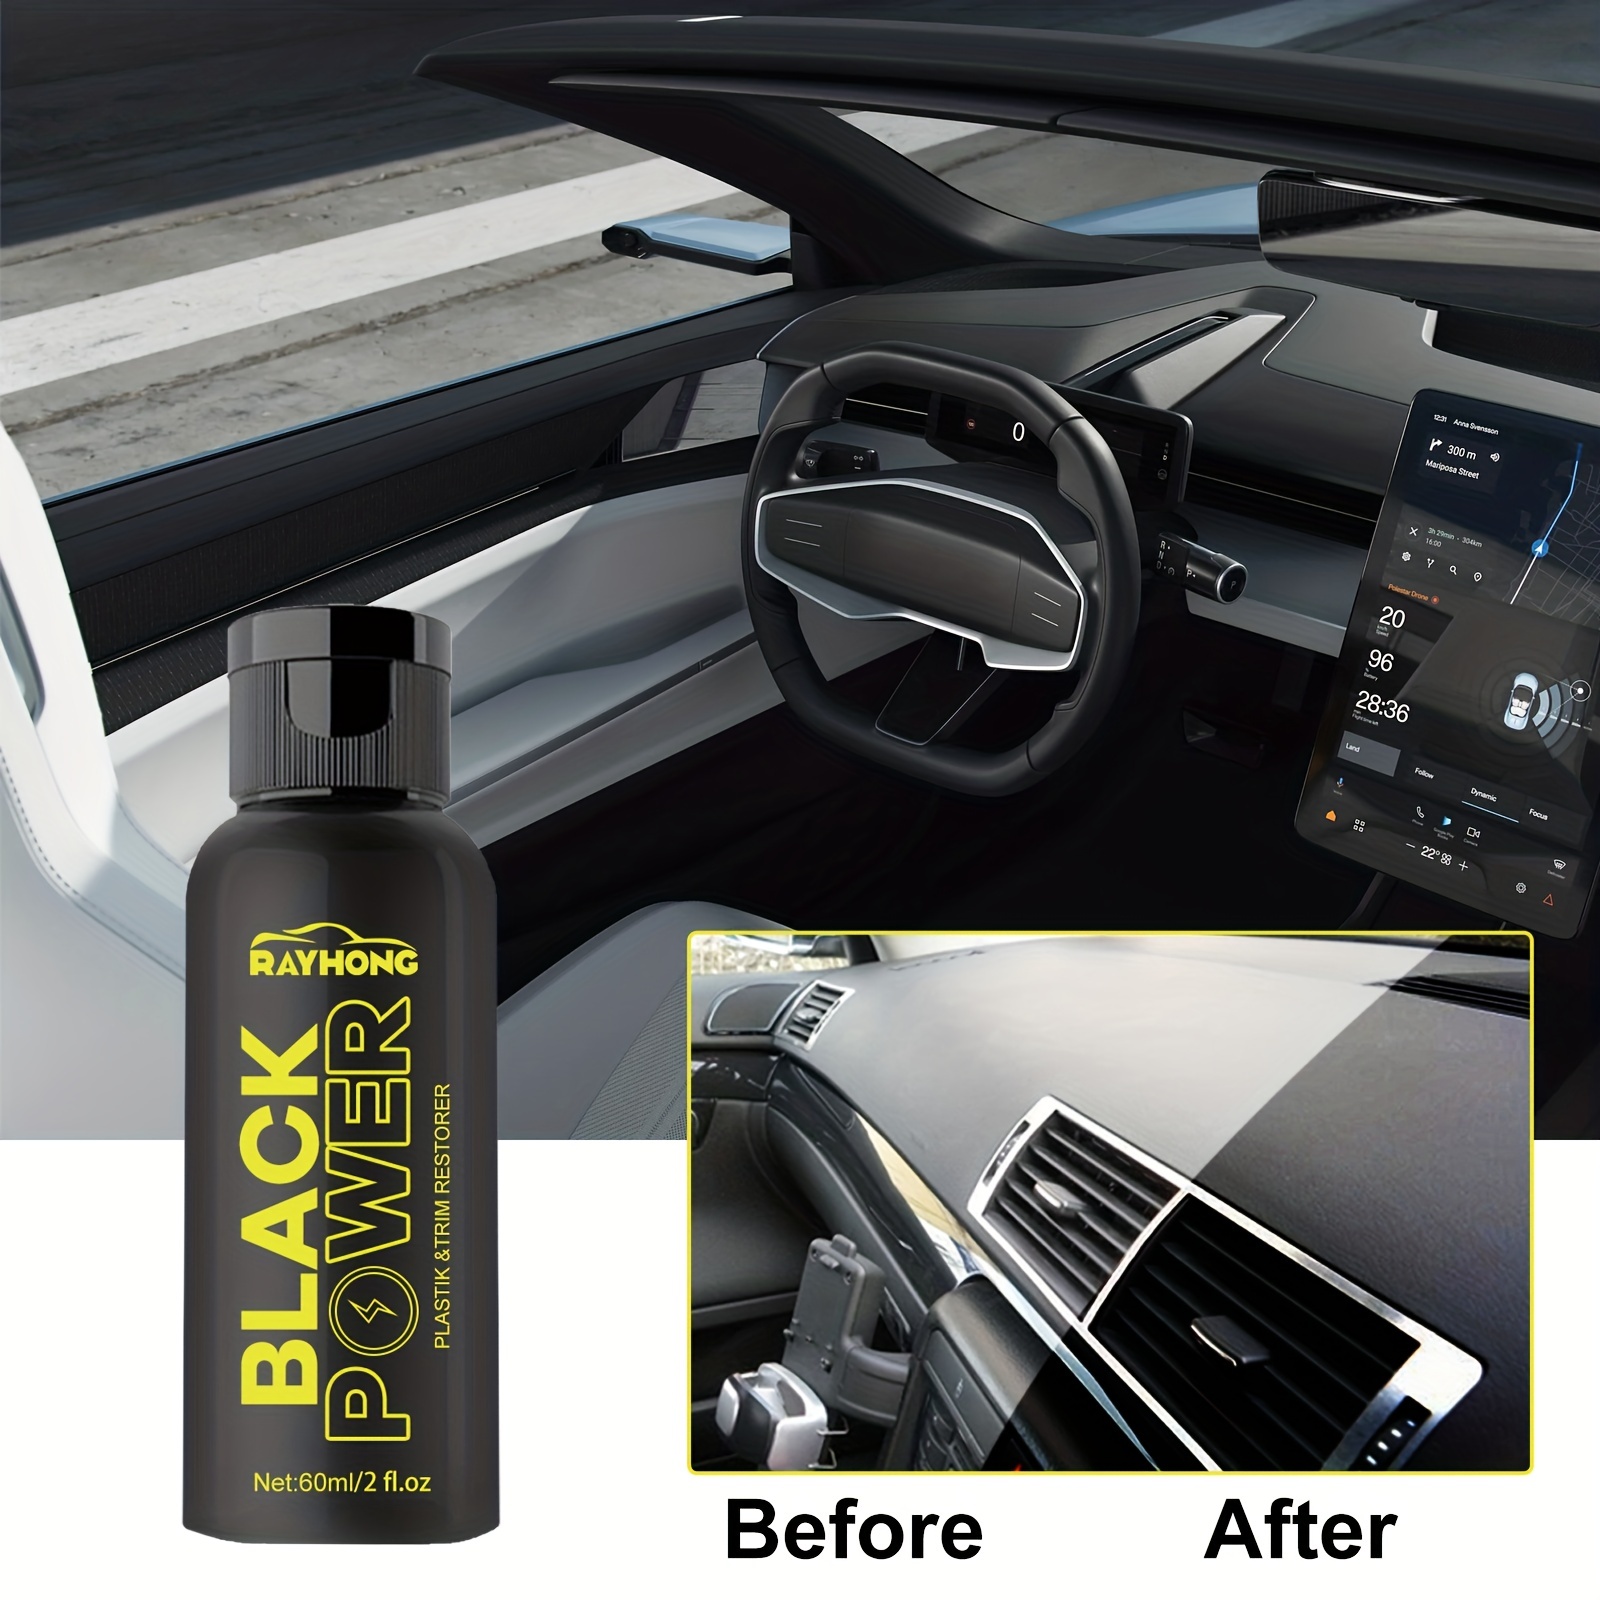 HGKJ Car Engine Cleaner Stains Dirt Grease Remover - Back To Black & Delay  Aging - Car Care Detailing